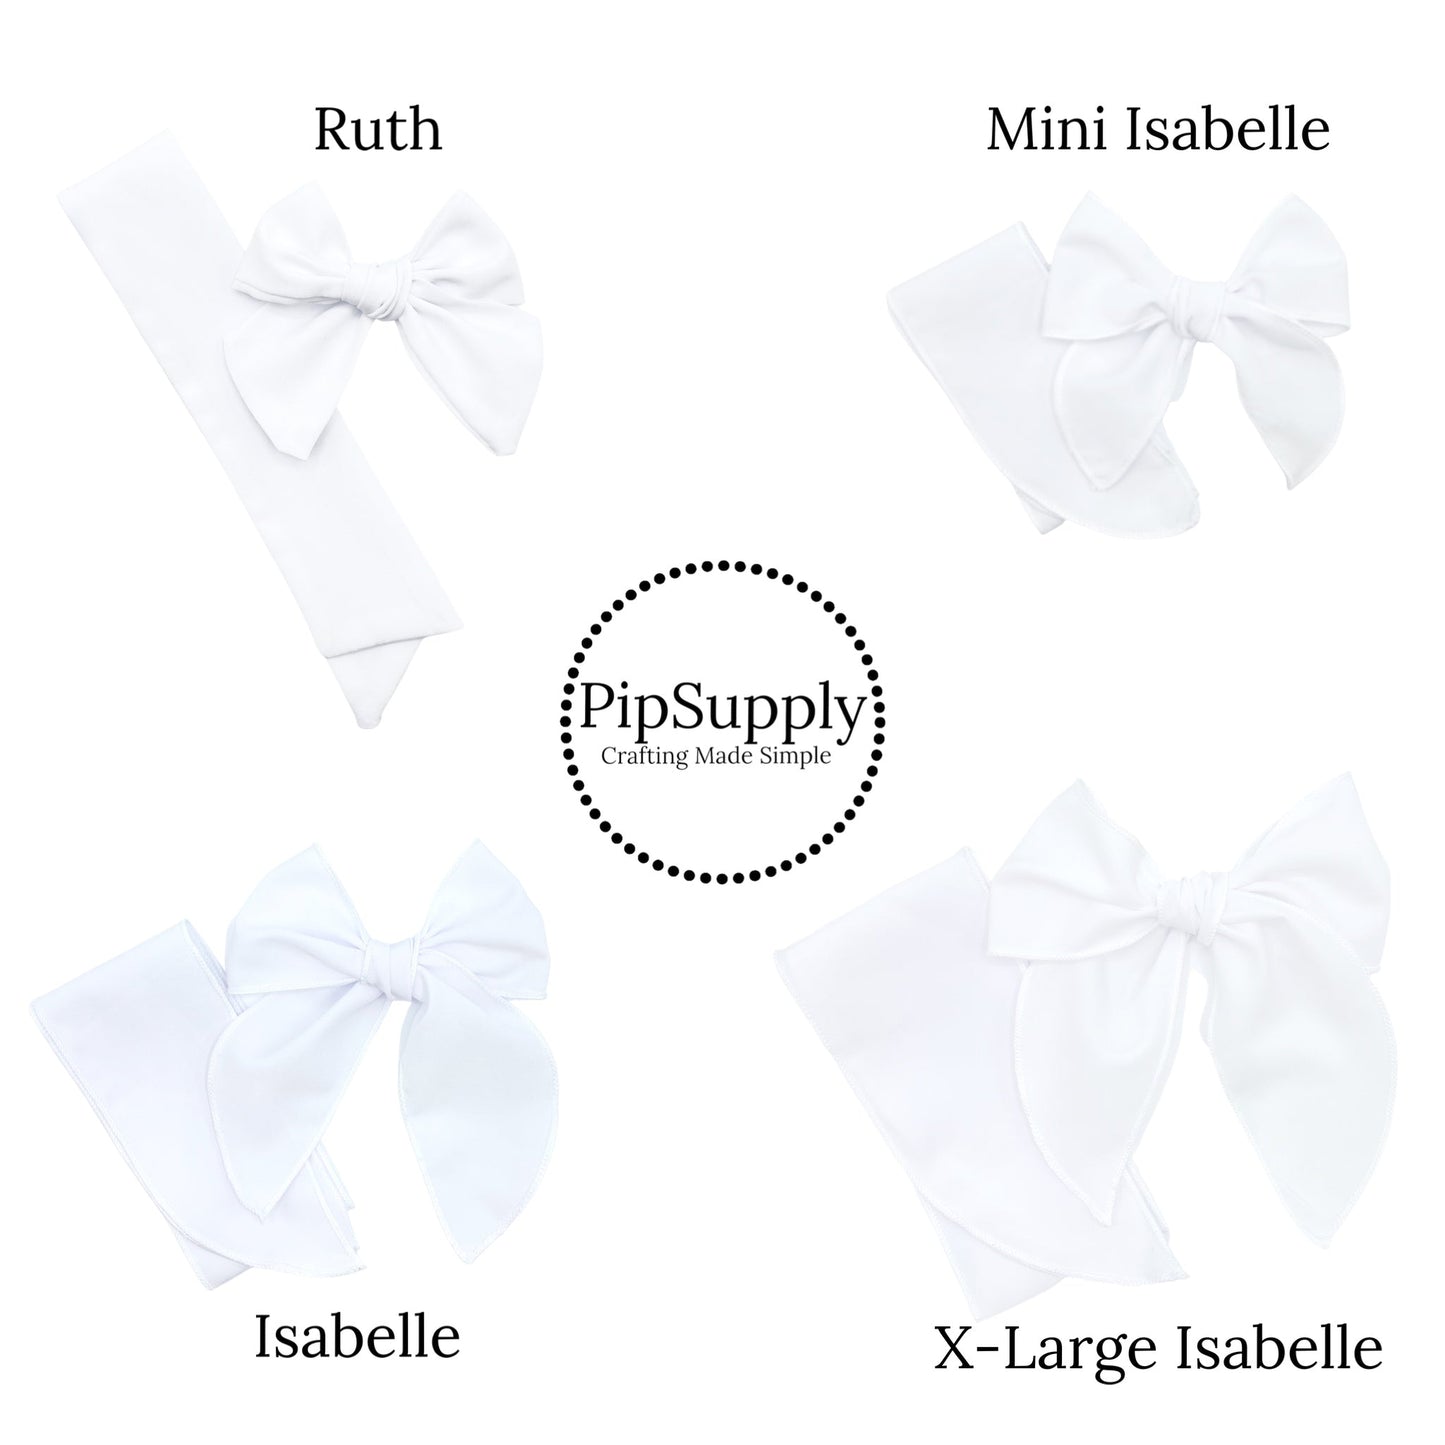 Pink Composition Hair Bow Strips